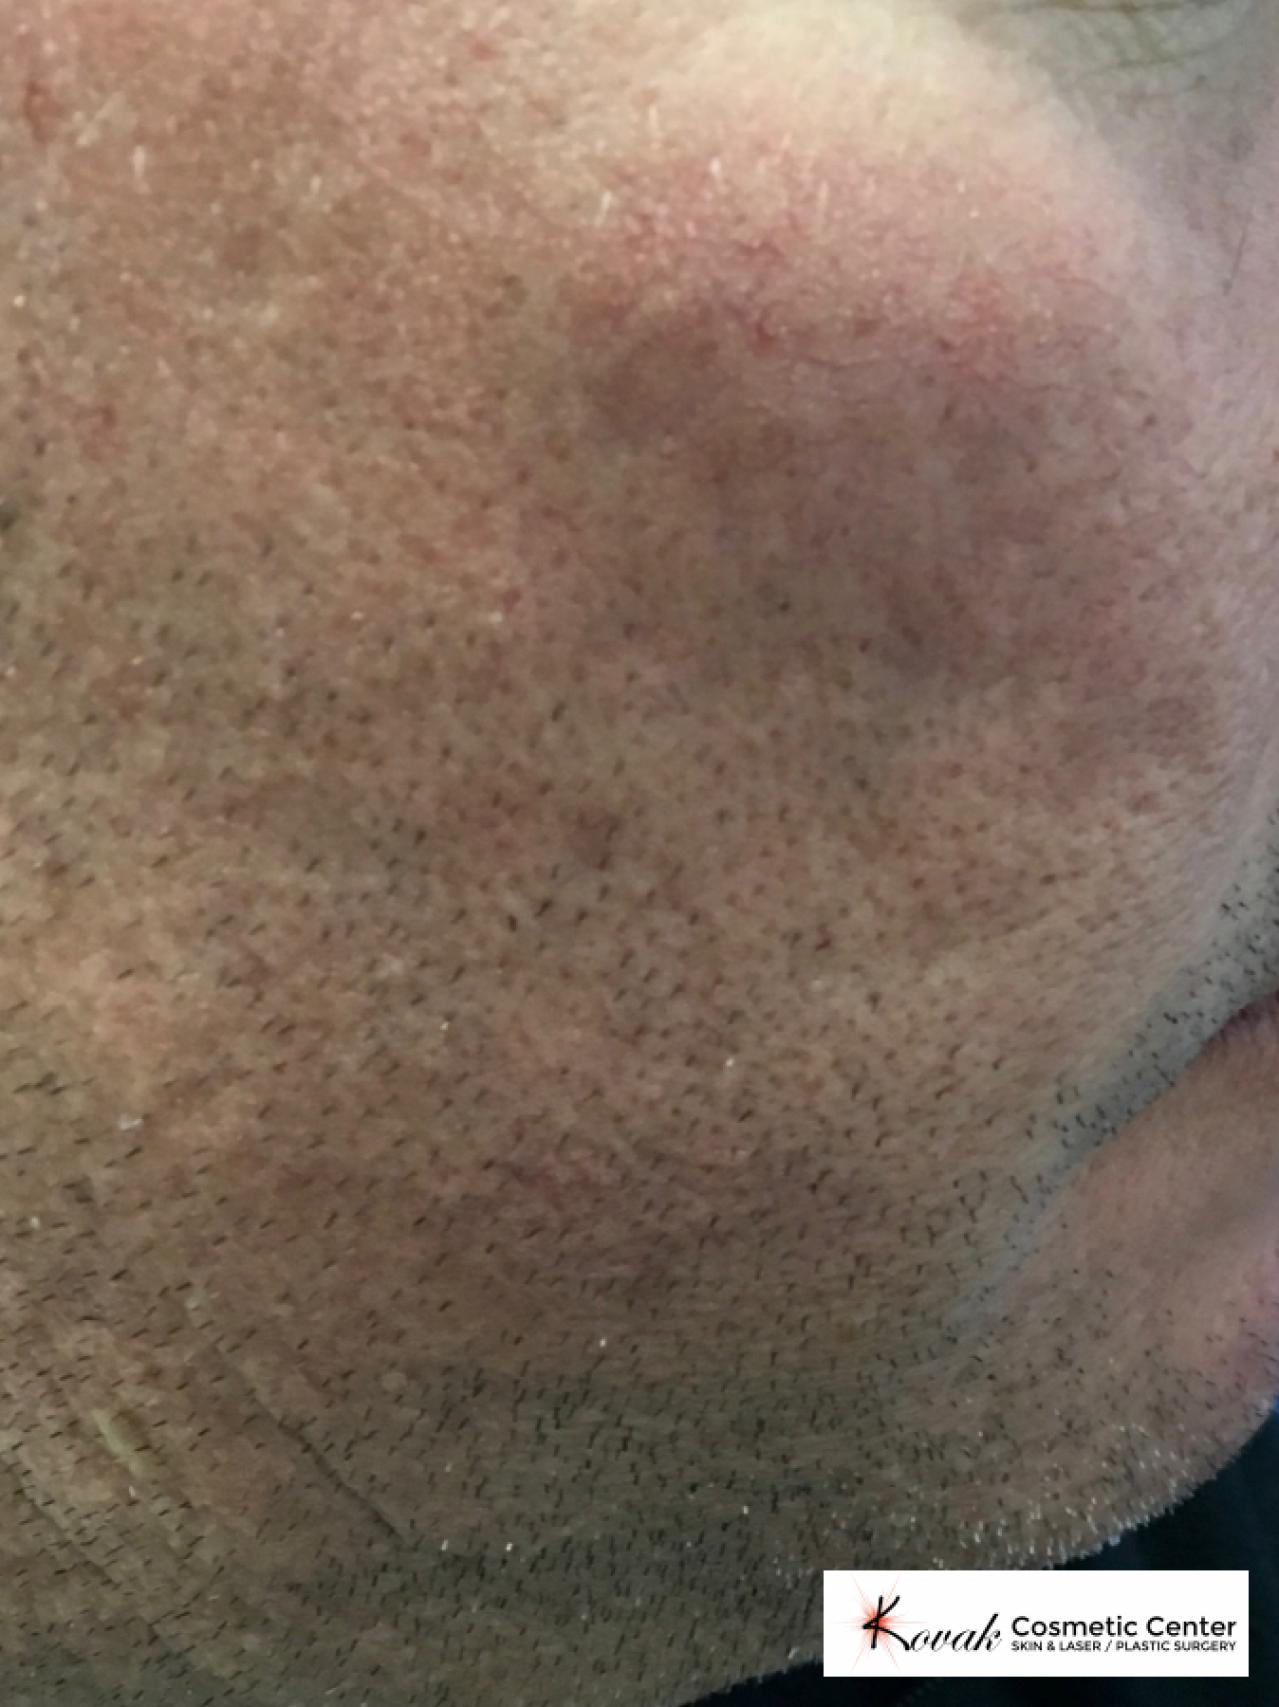 Acne Scars treated with Juvederm on 45 year old male - Before 